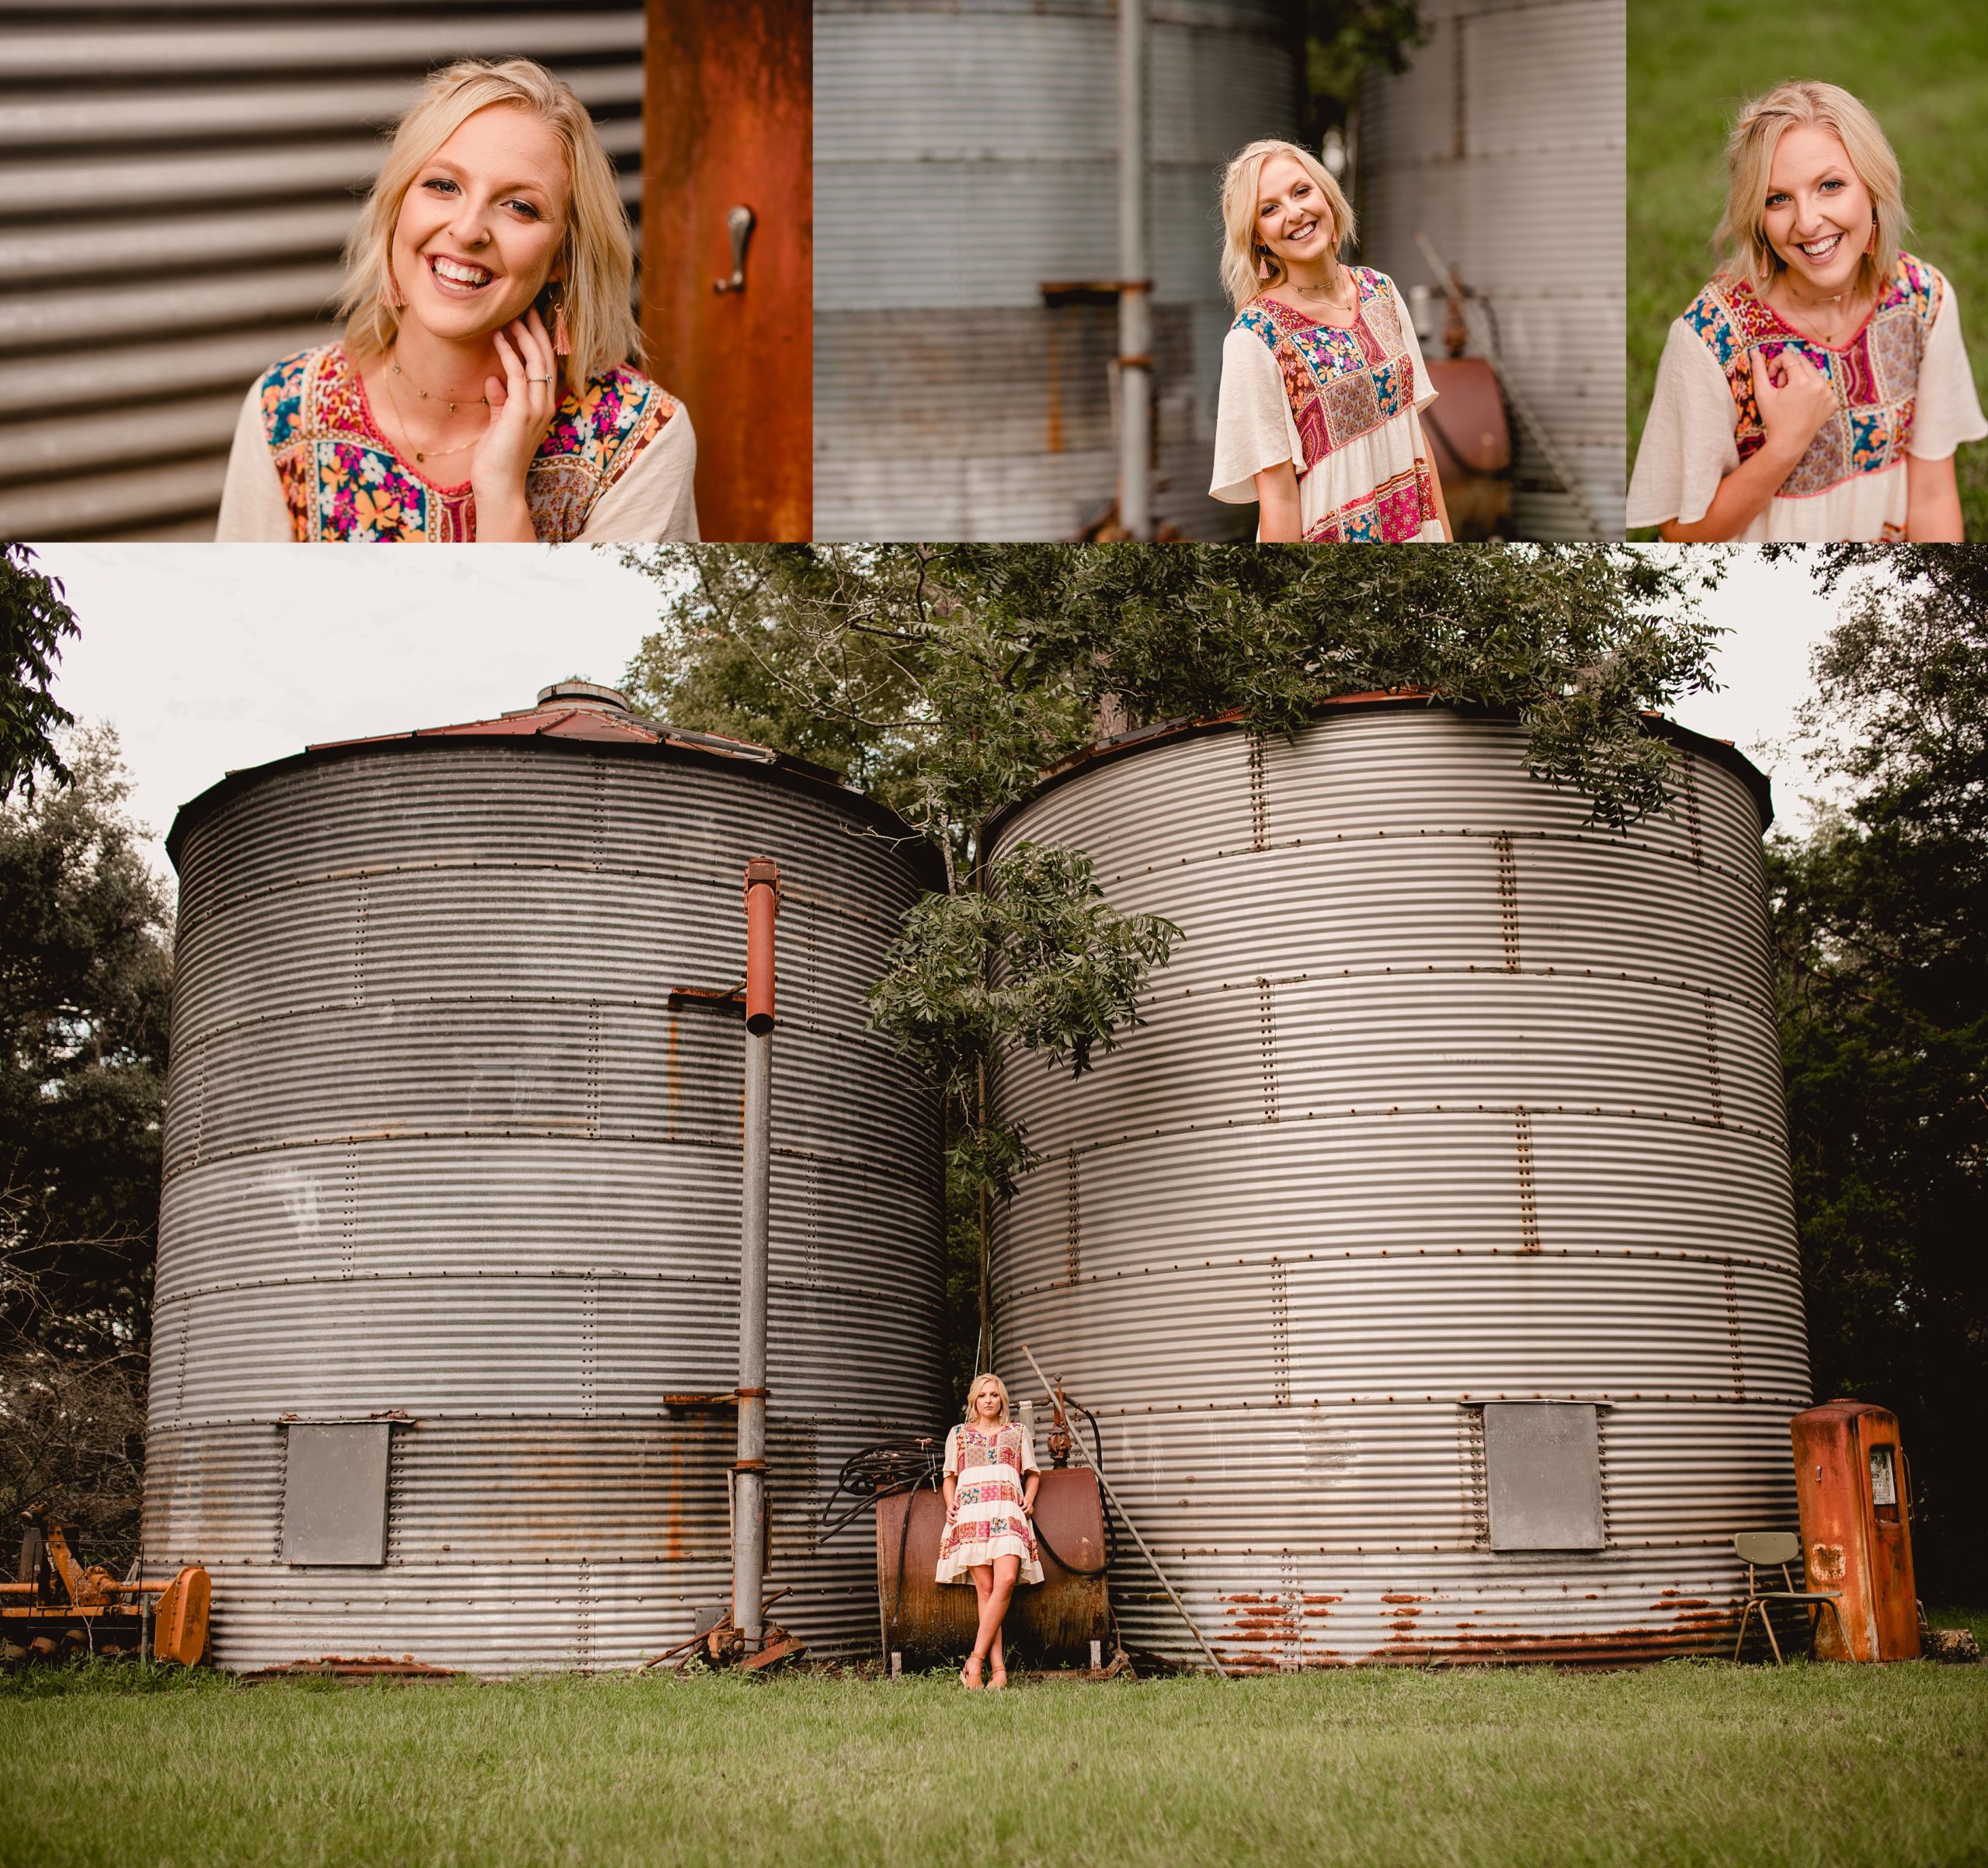 Silos used in senior pictures in North Florida.